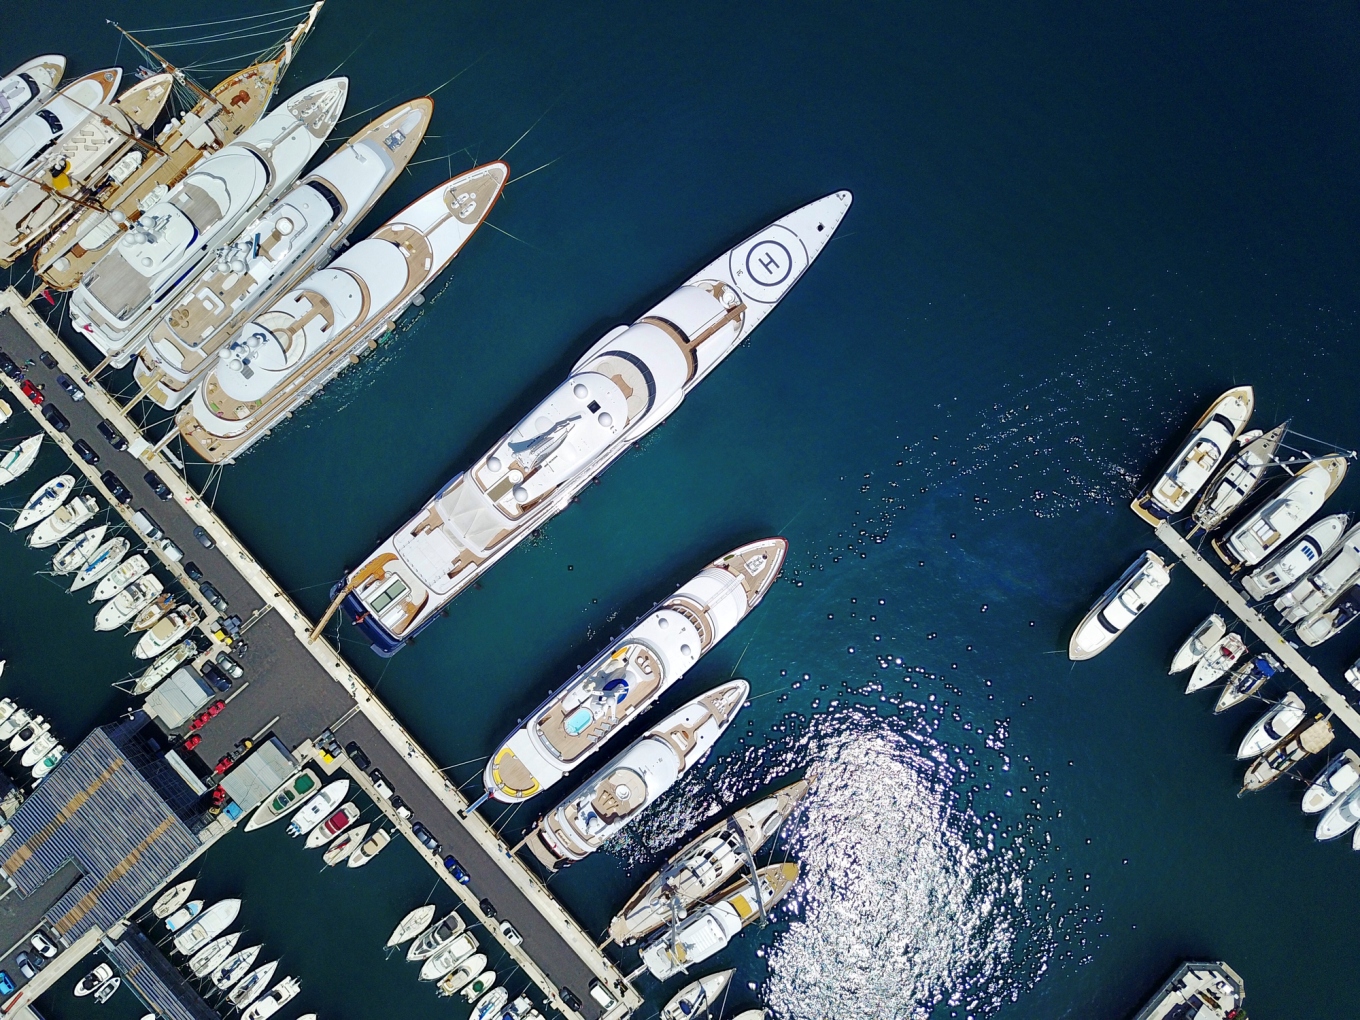 Aerial view of yacht with different sizes